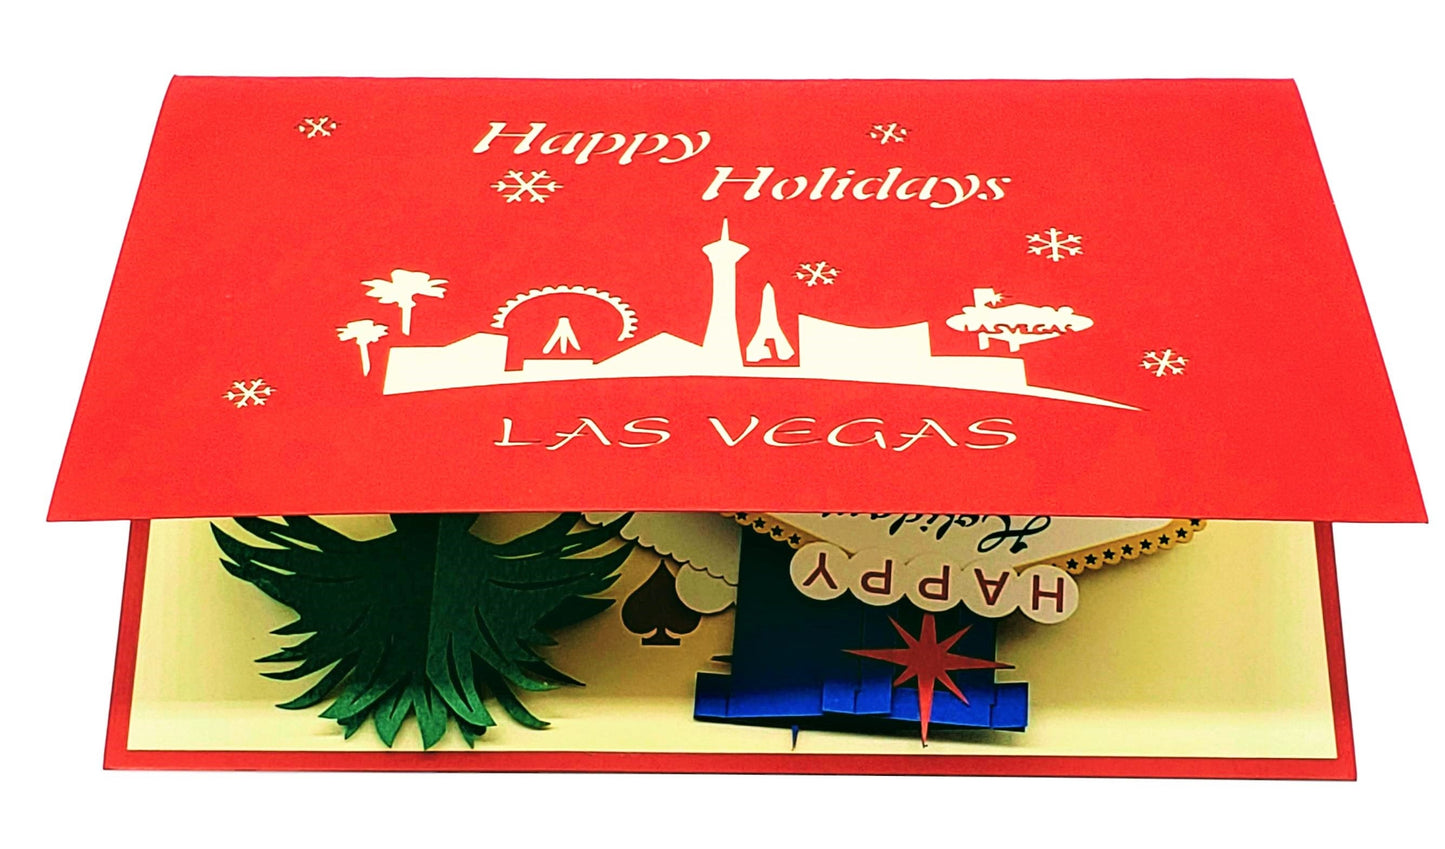 Las Vegas Christmas 3D Pop Up Greeting Card - Christmas - iGifts And Cards